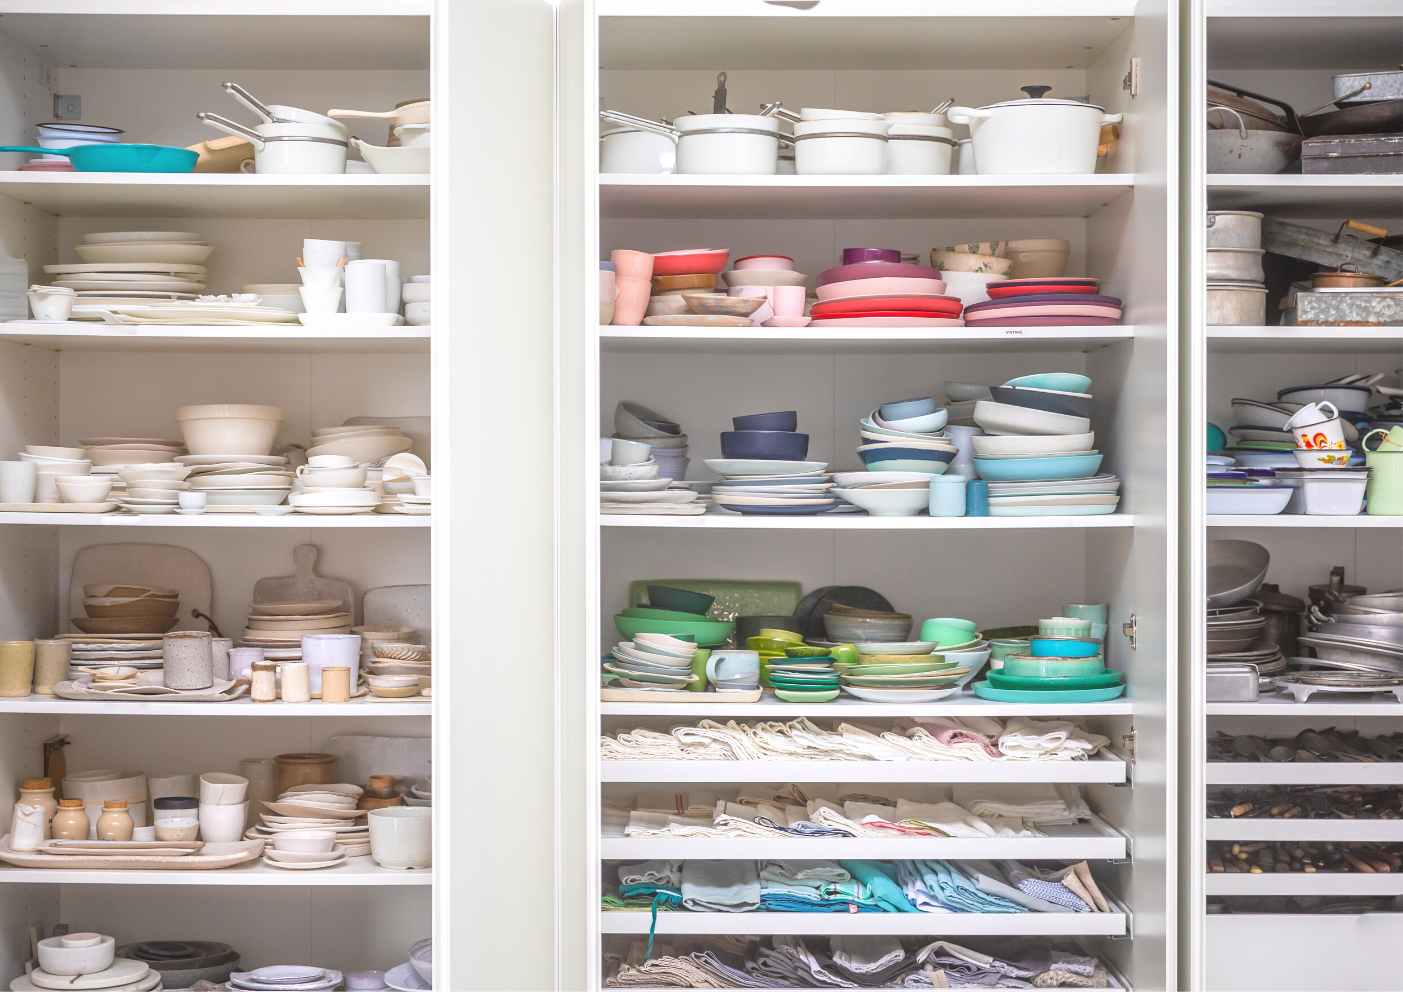 Tips To a More Organized Kitchen